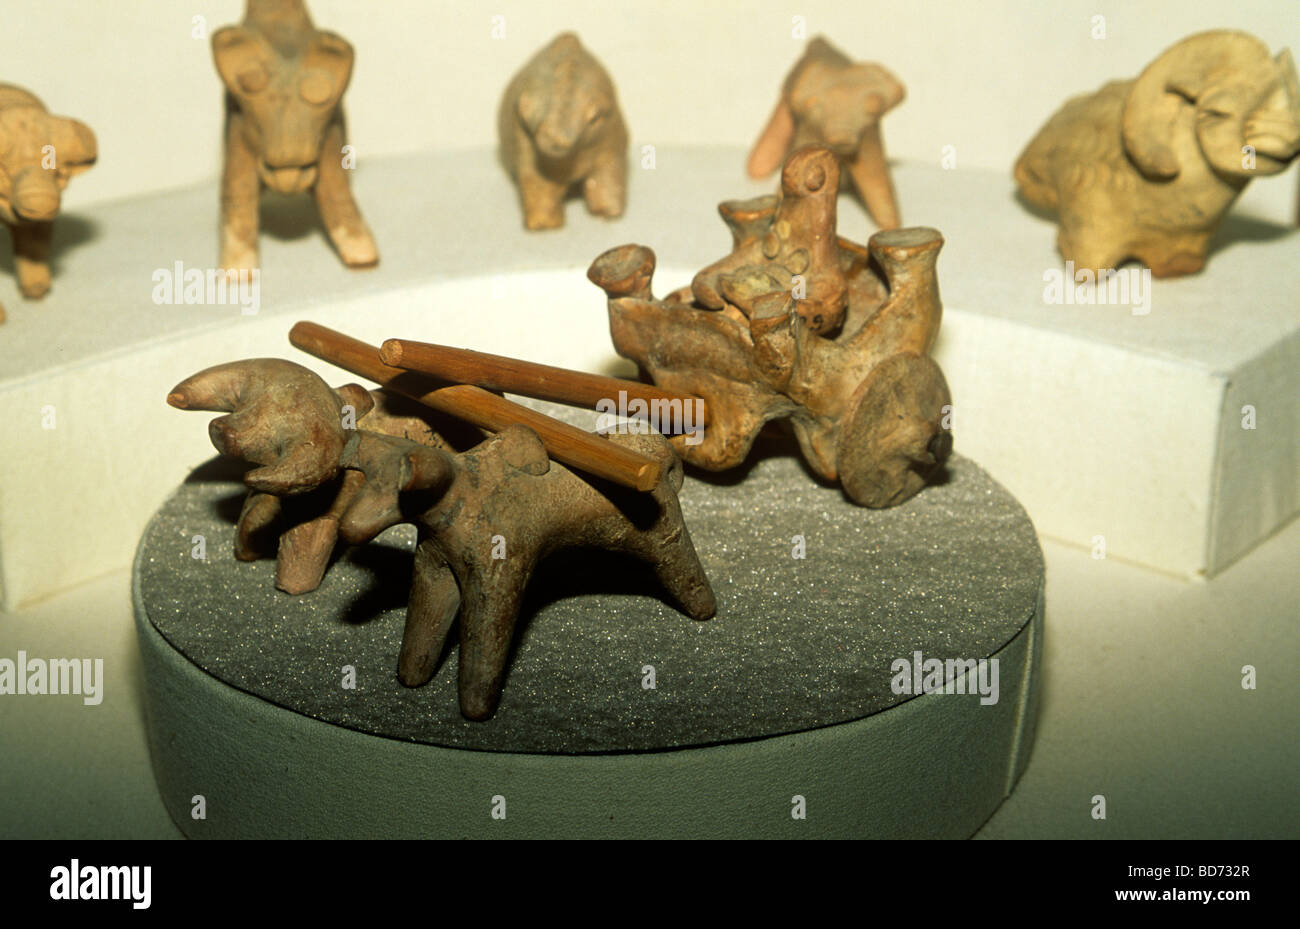 Figurines unearthed at Mohenjodaro ancient Indus Valley city in what is now Pakistan. Stock Photo